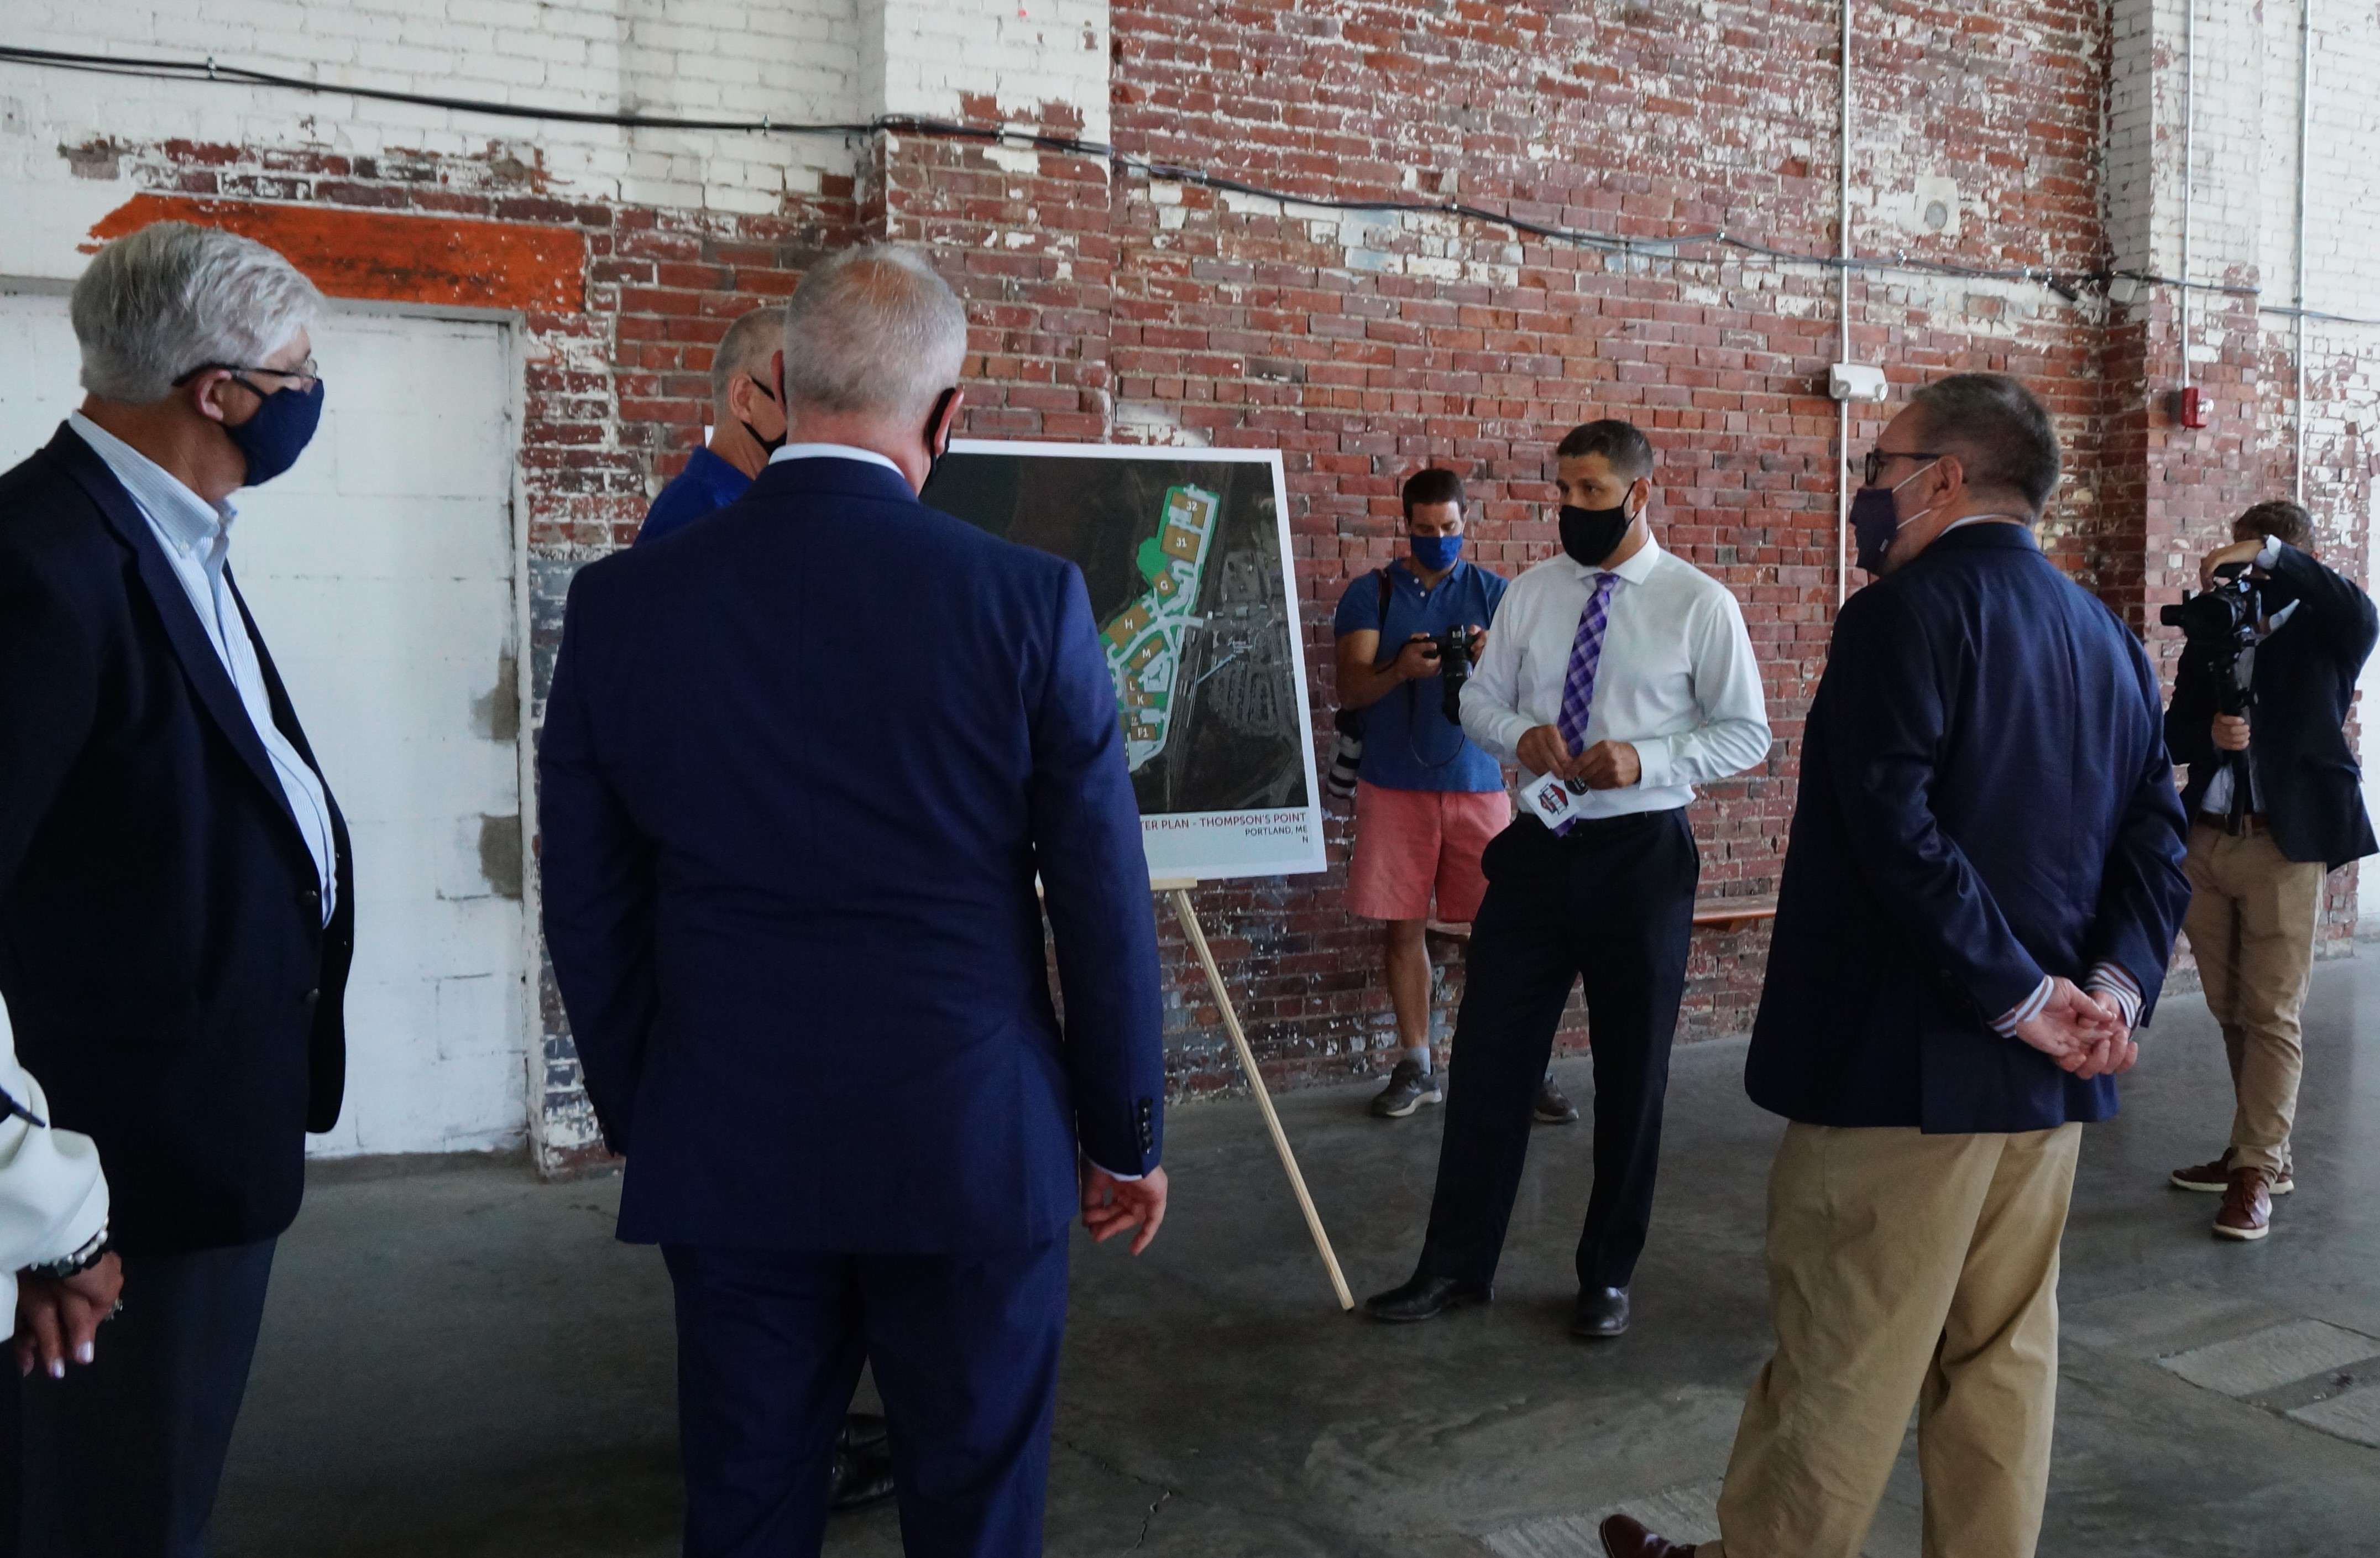 A man points to a diagram of a commercial development on an easel, as a bunch of men in suits look on.